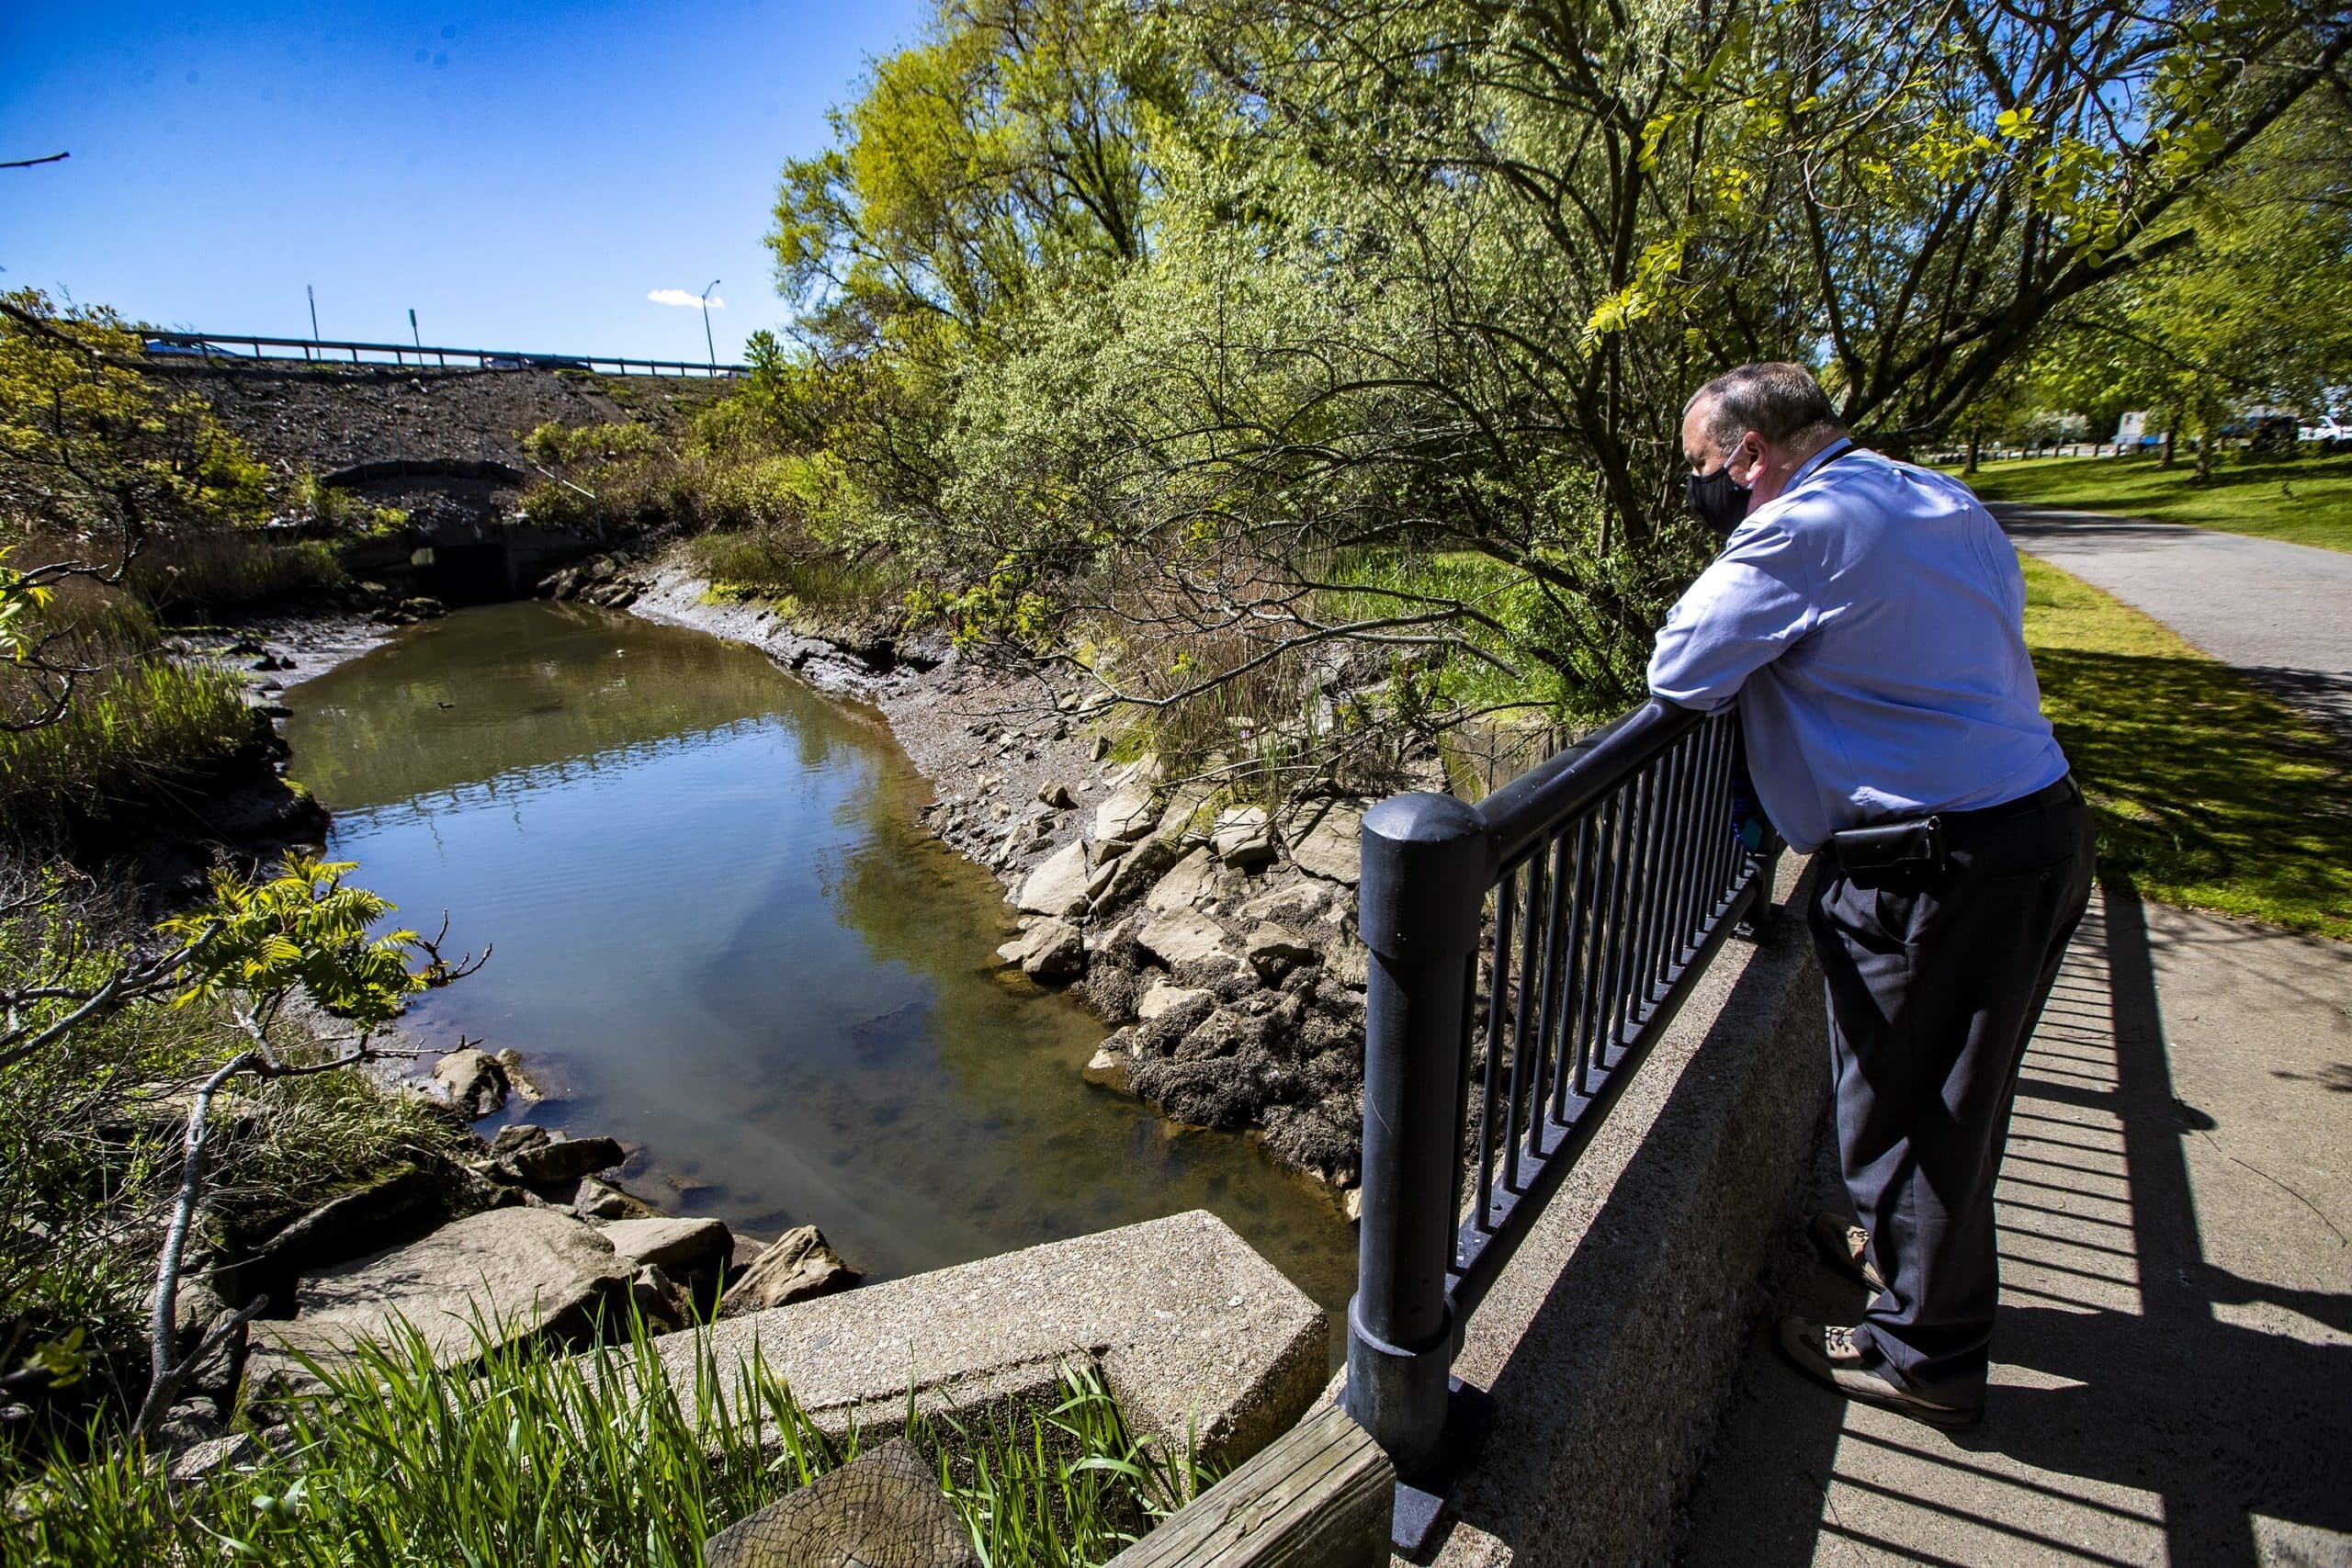 Charlie Jewell, director of planning at Boston Water and Sewer Commission, stands on a bridge near I-93 and watches water flowing in Davenport Creek. When it rains, stormwater flows into this creek and eventually ends up in Boston Harbor. (Jesse Costa/WBUR)